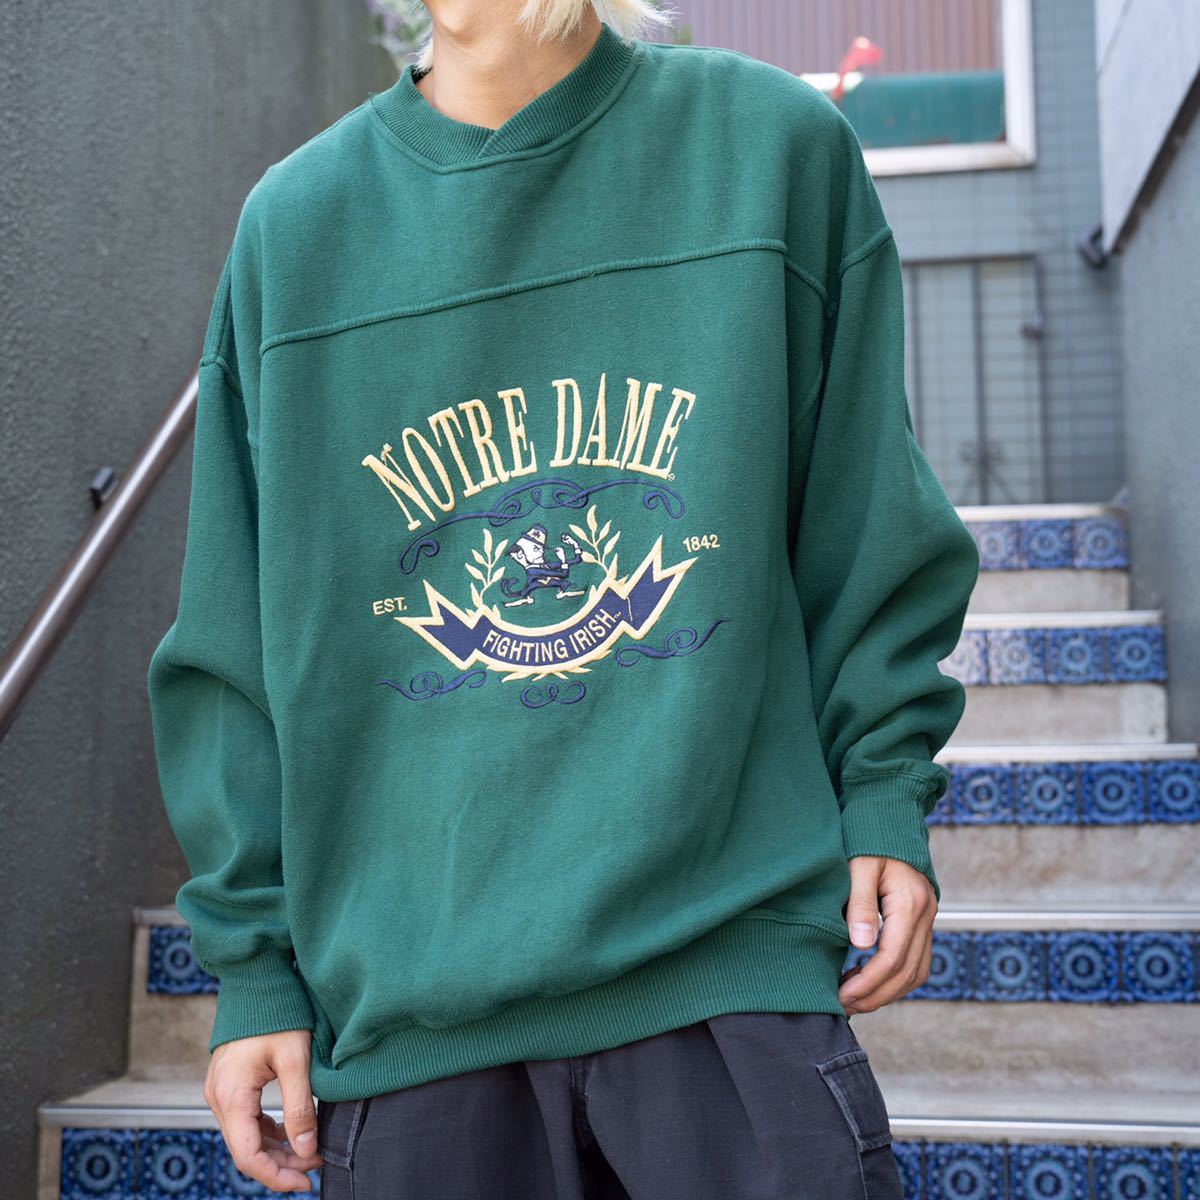 USA VINTAGE CRABLE SPORTS WEAR COLLAGE DESIGN EMBROIDERY SWEAT SHIRT/アメリカ古着カレッジ刺繍デザインスウェット